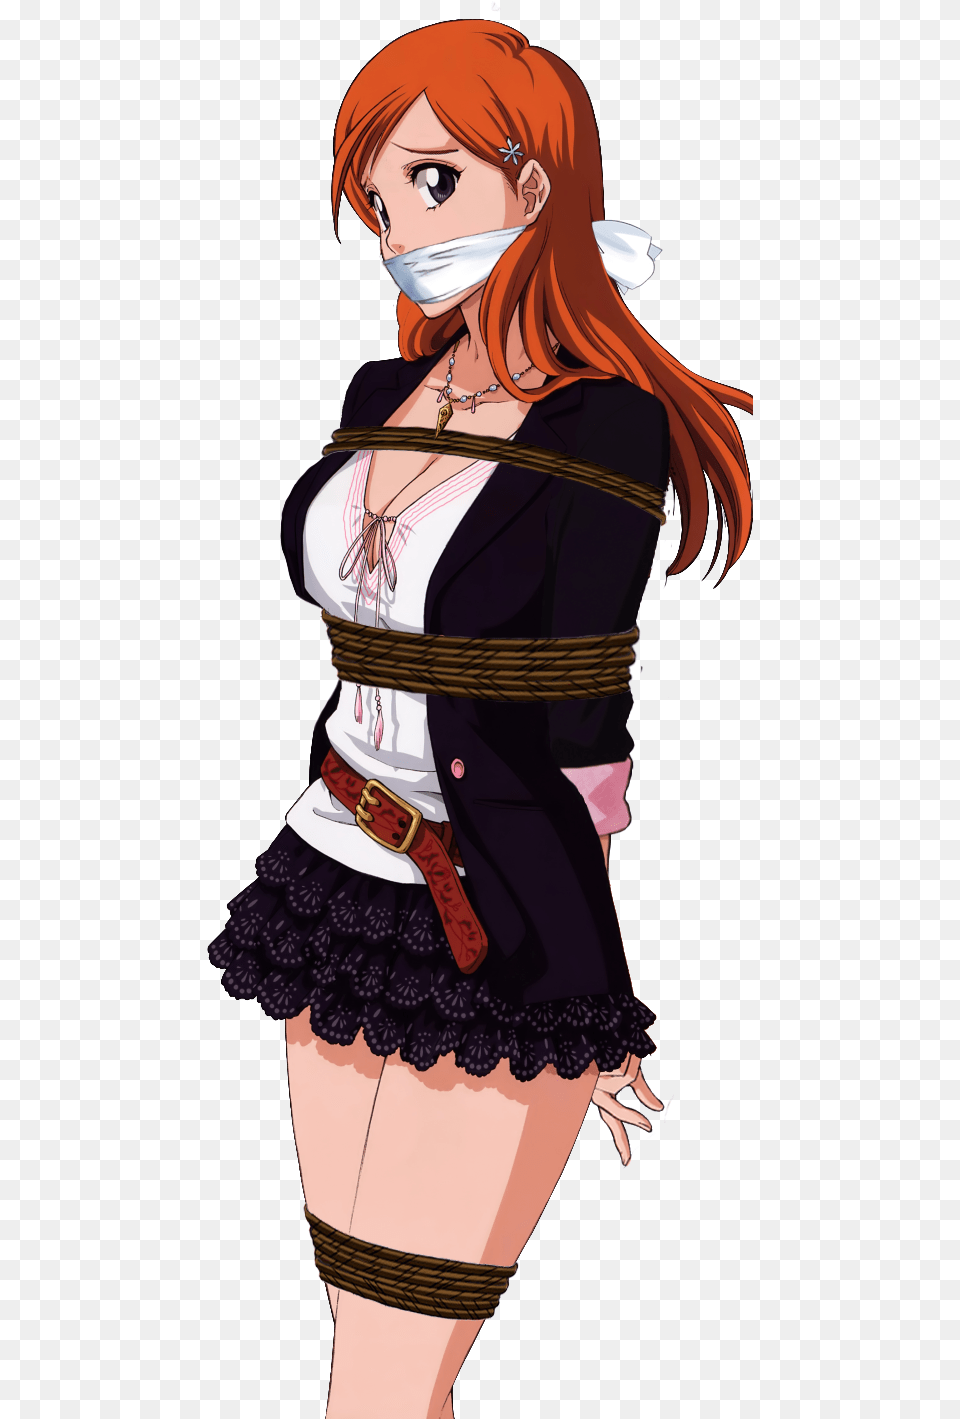 Orihime Inoue From Bleach Tied Up Ampamp Orihime Inoue, Manga, Book, Clothing, Comics Free Png